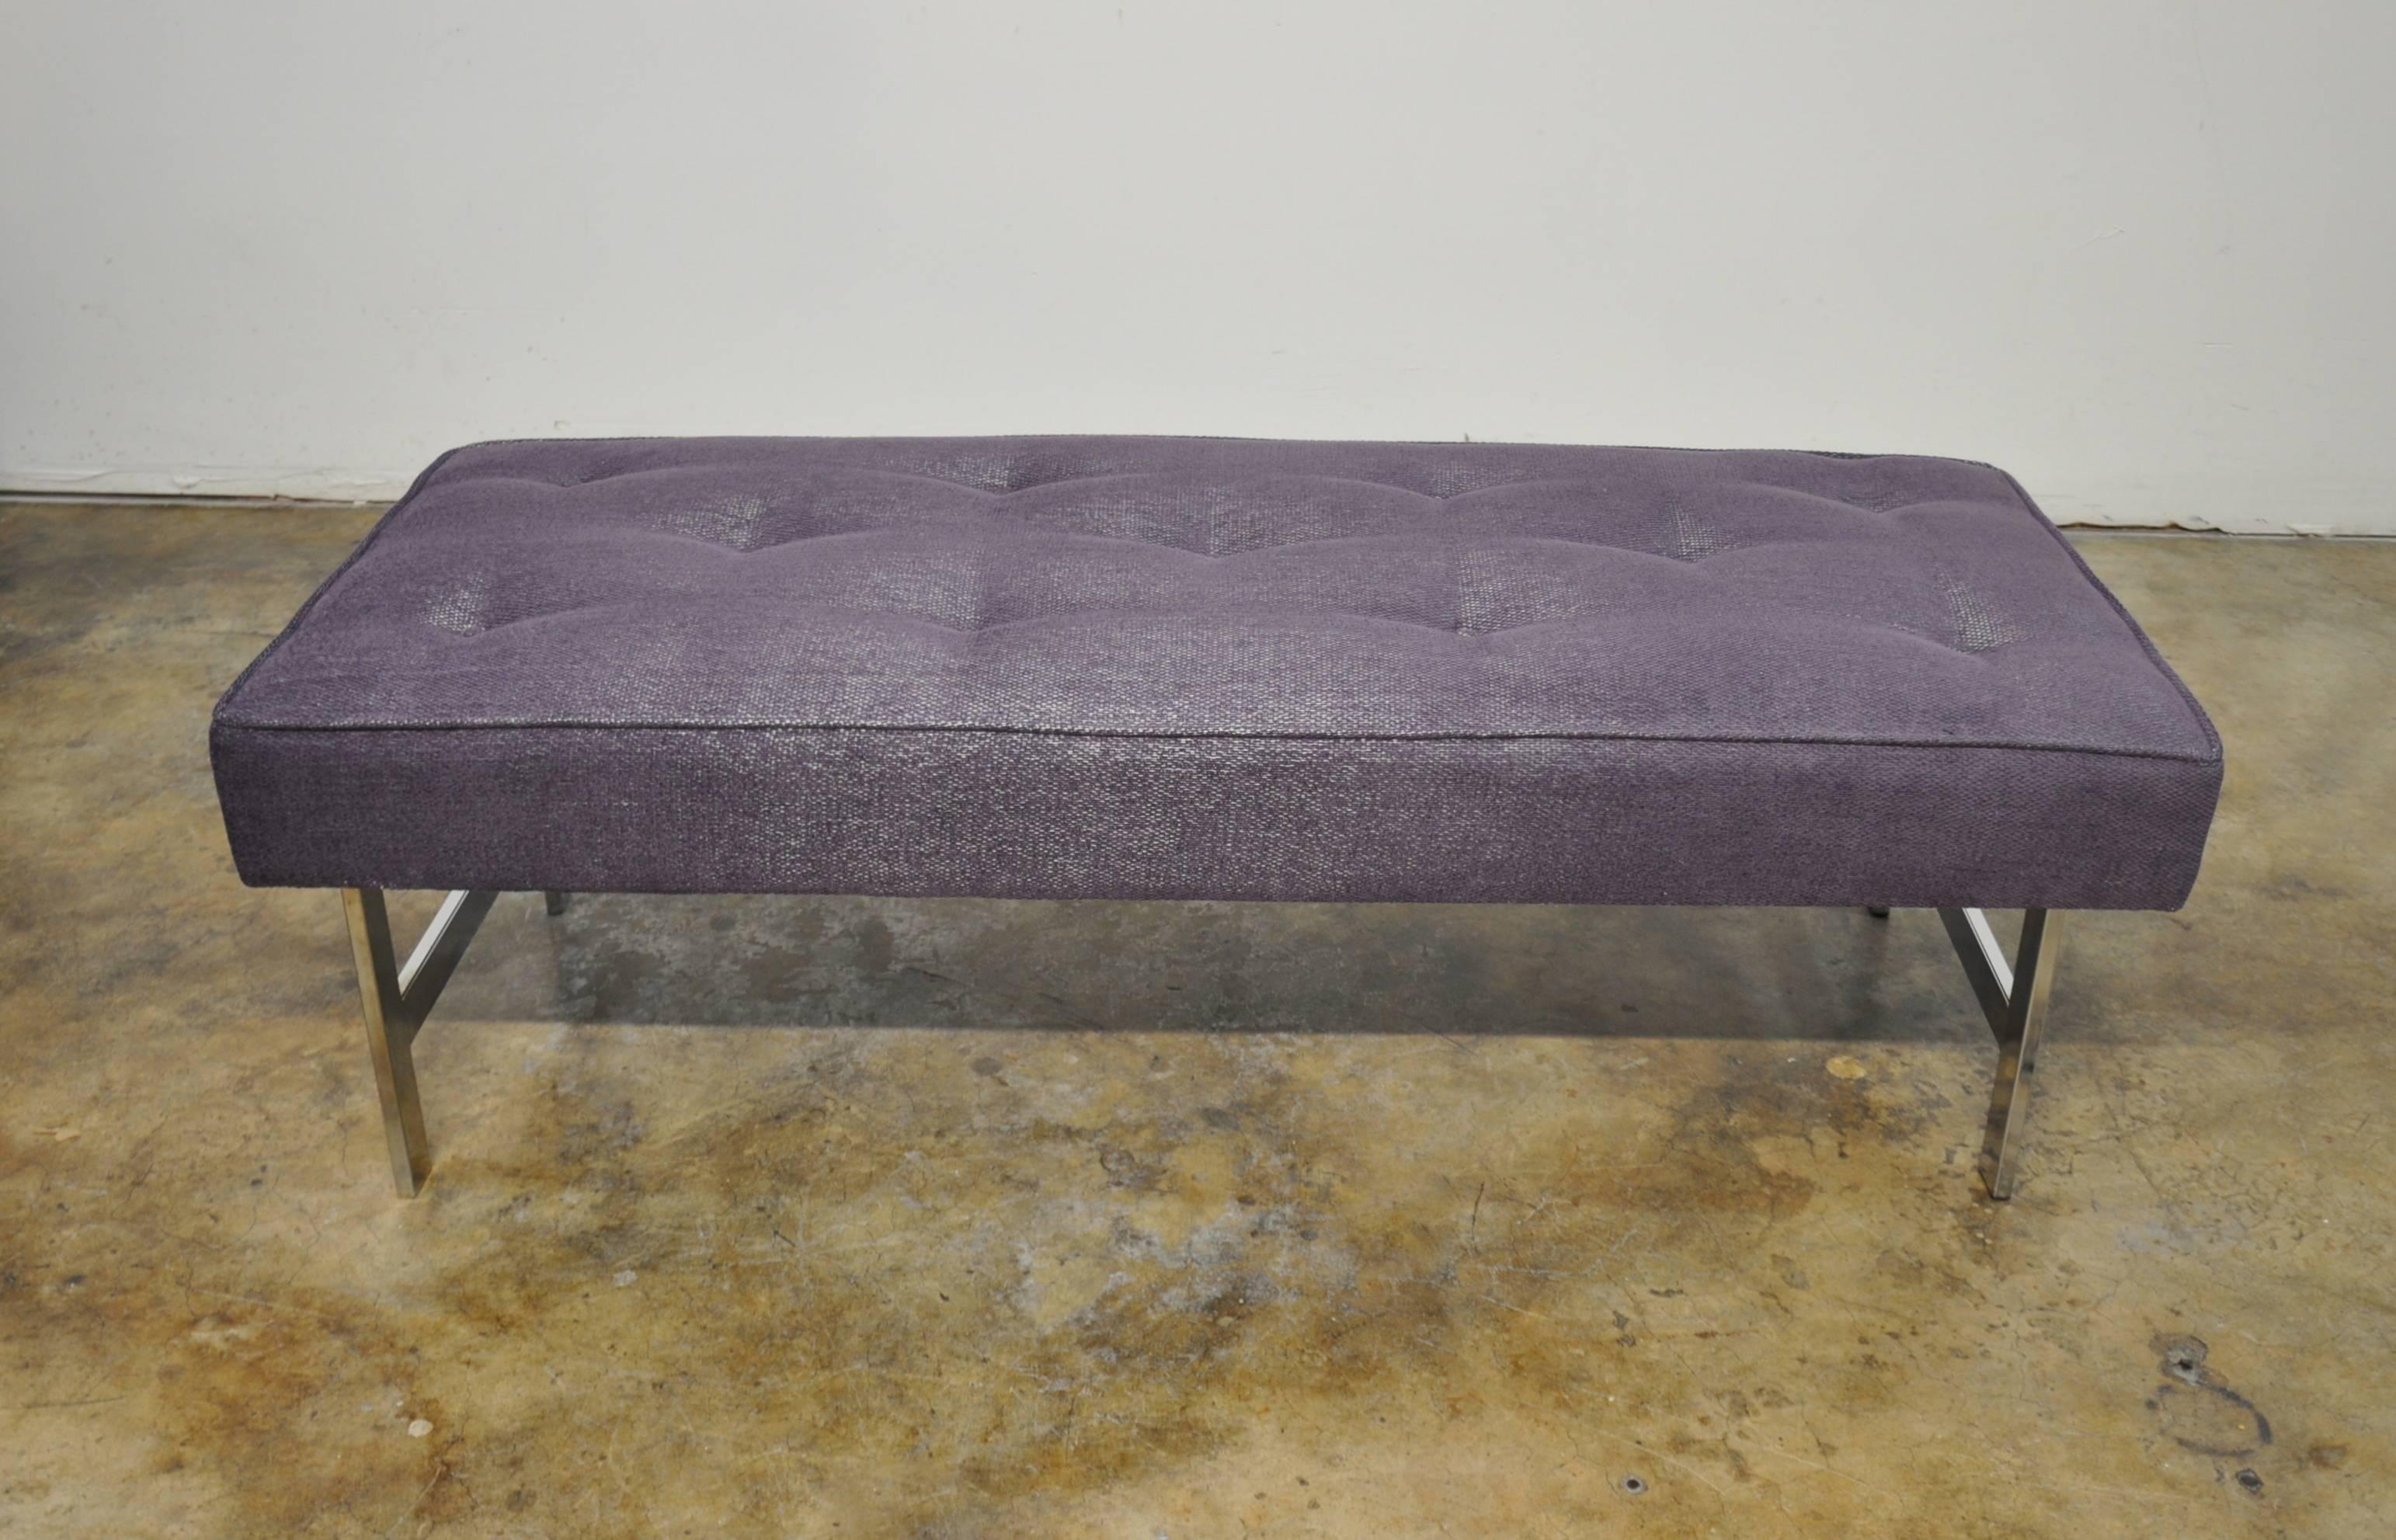 This decorative vintage long ottoman features chrome legs and tufted seat. It has been reupholstered in a light plum with silver undertones chenille. Great size that can work virtually anywhere: At the foot of a bed, in an entrance, as a sofa or